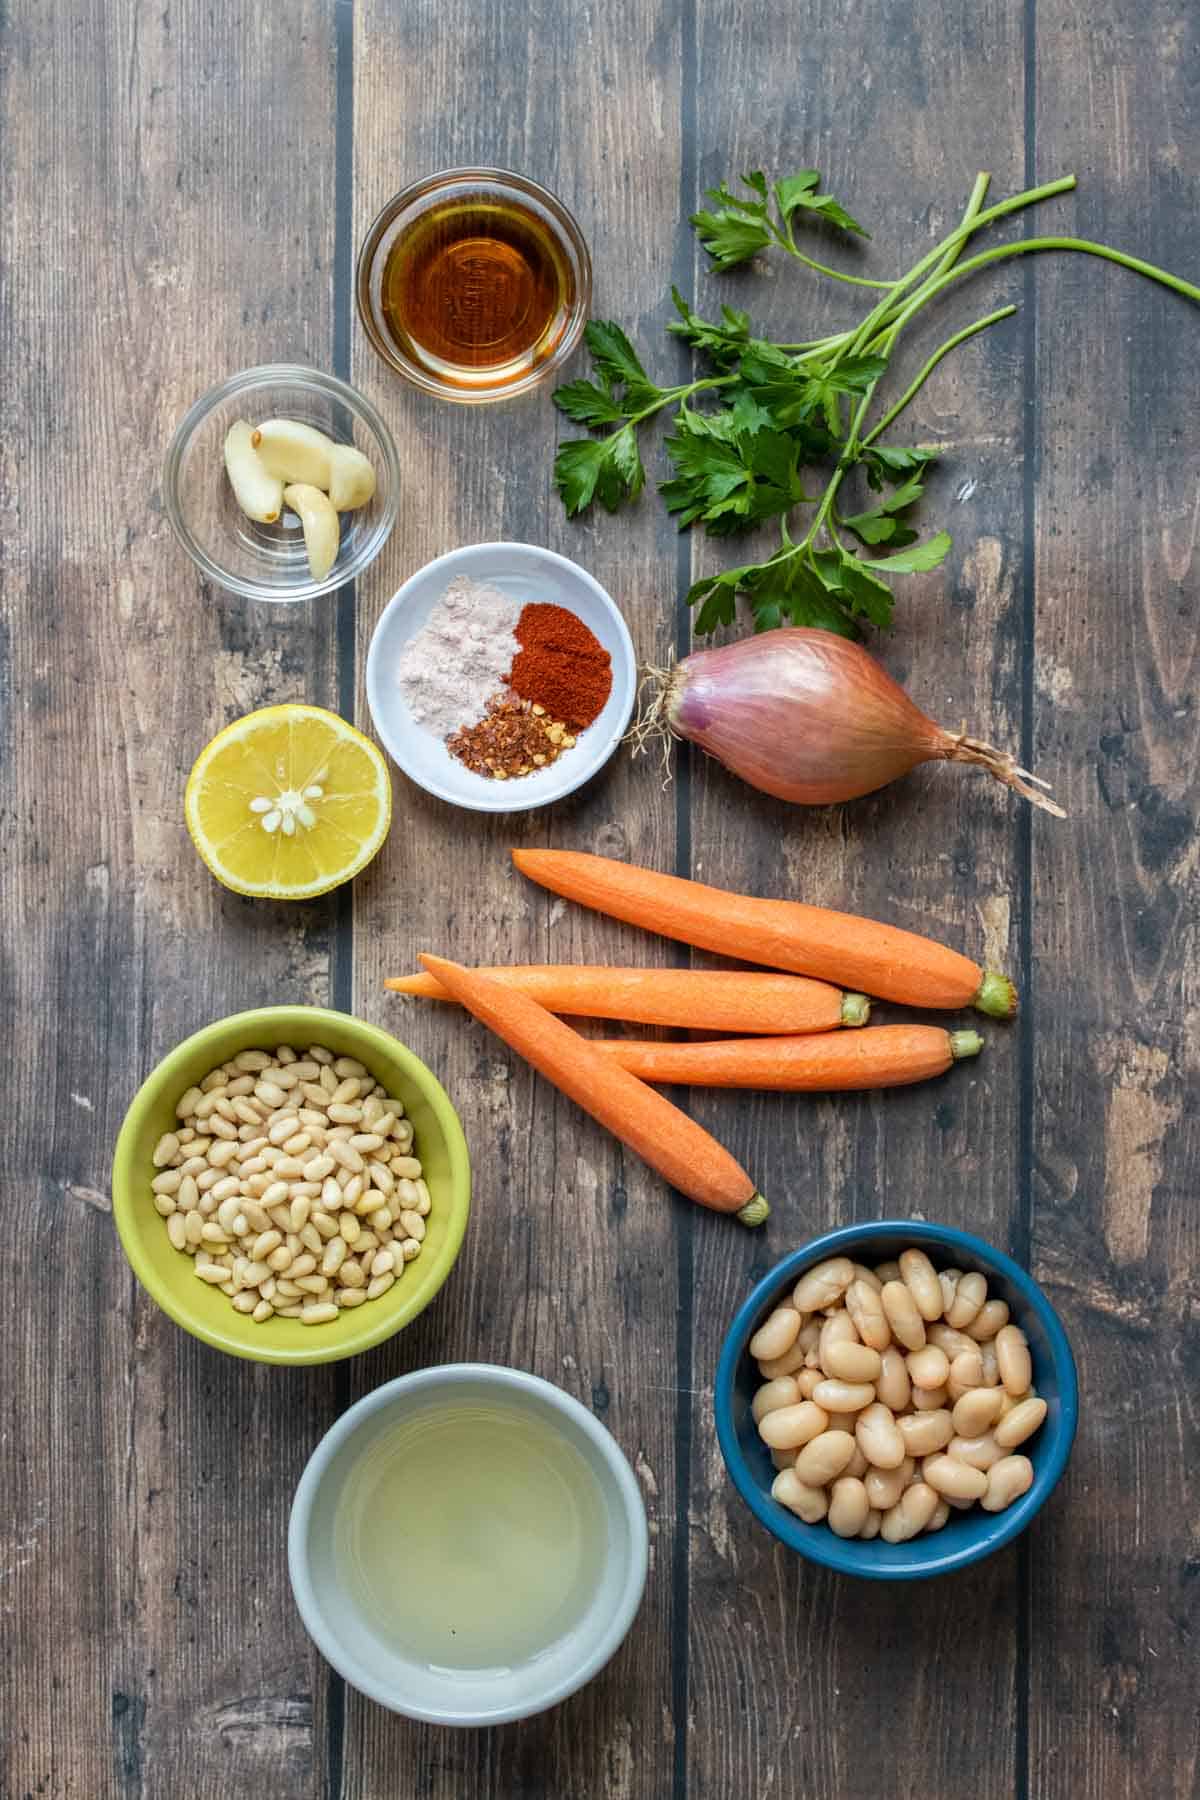 Ingredients on a wooden surface and in bowls that you would use to make a roasted carrot hummus with pine nuts and shallots